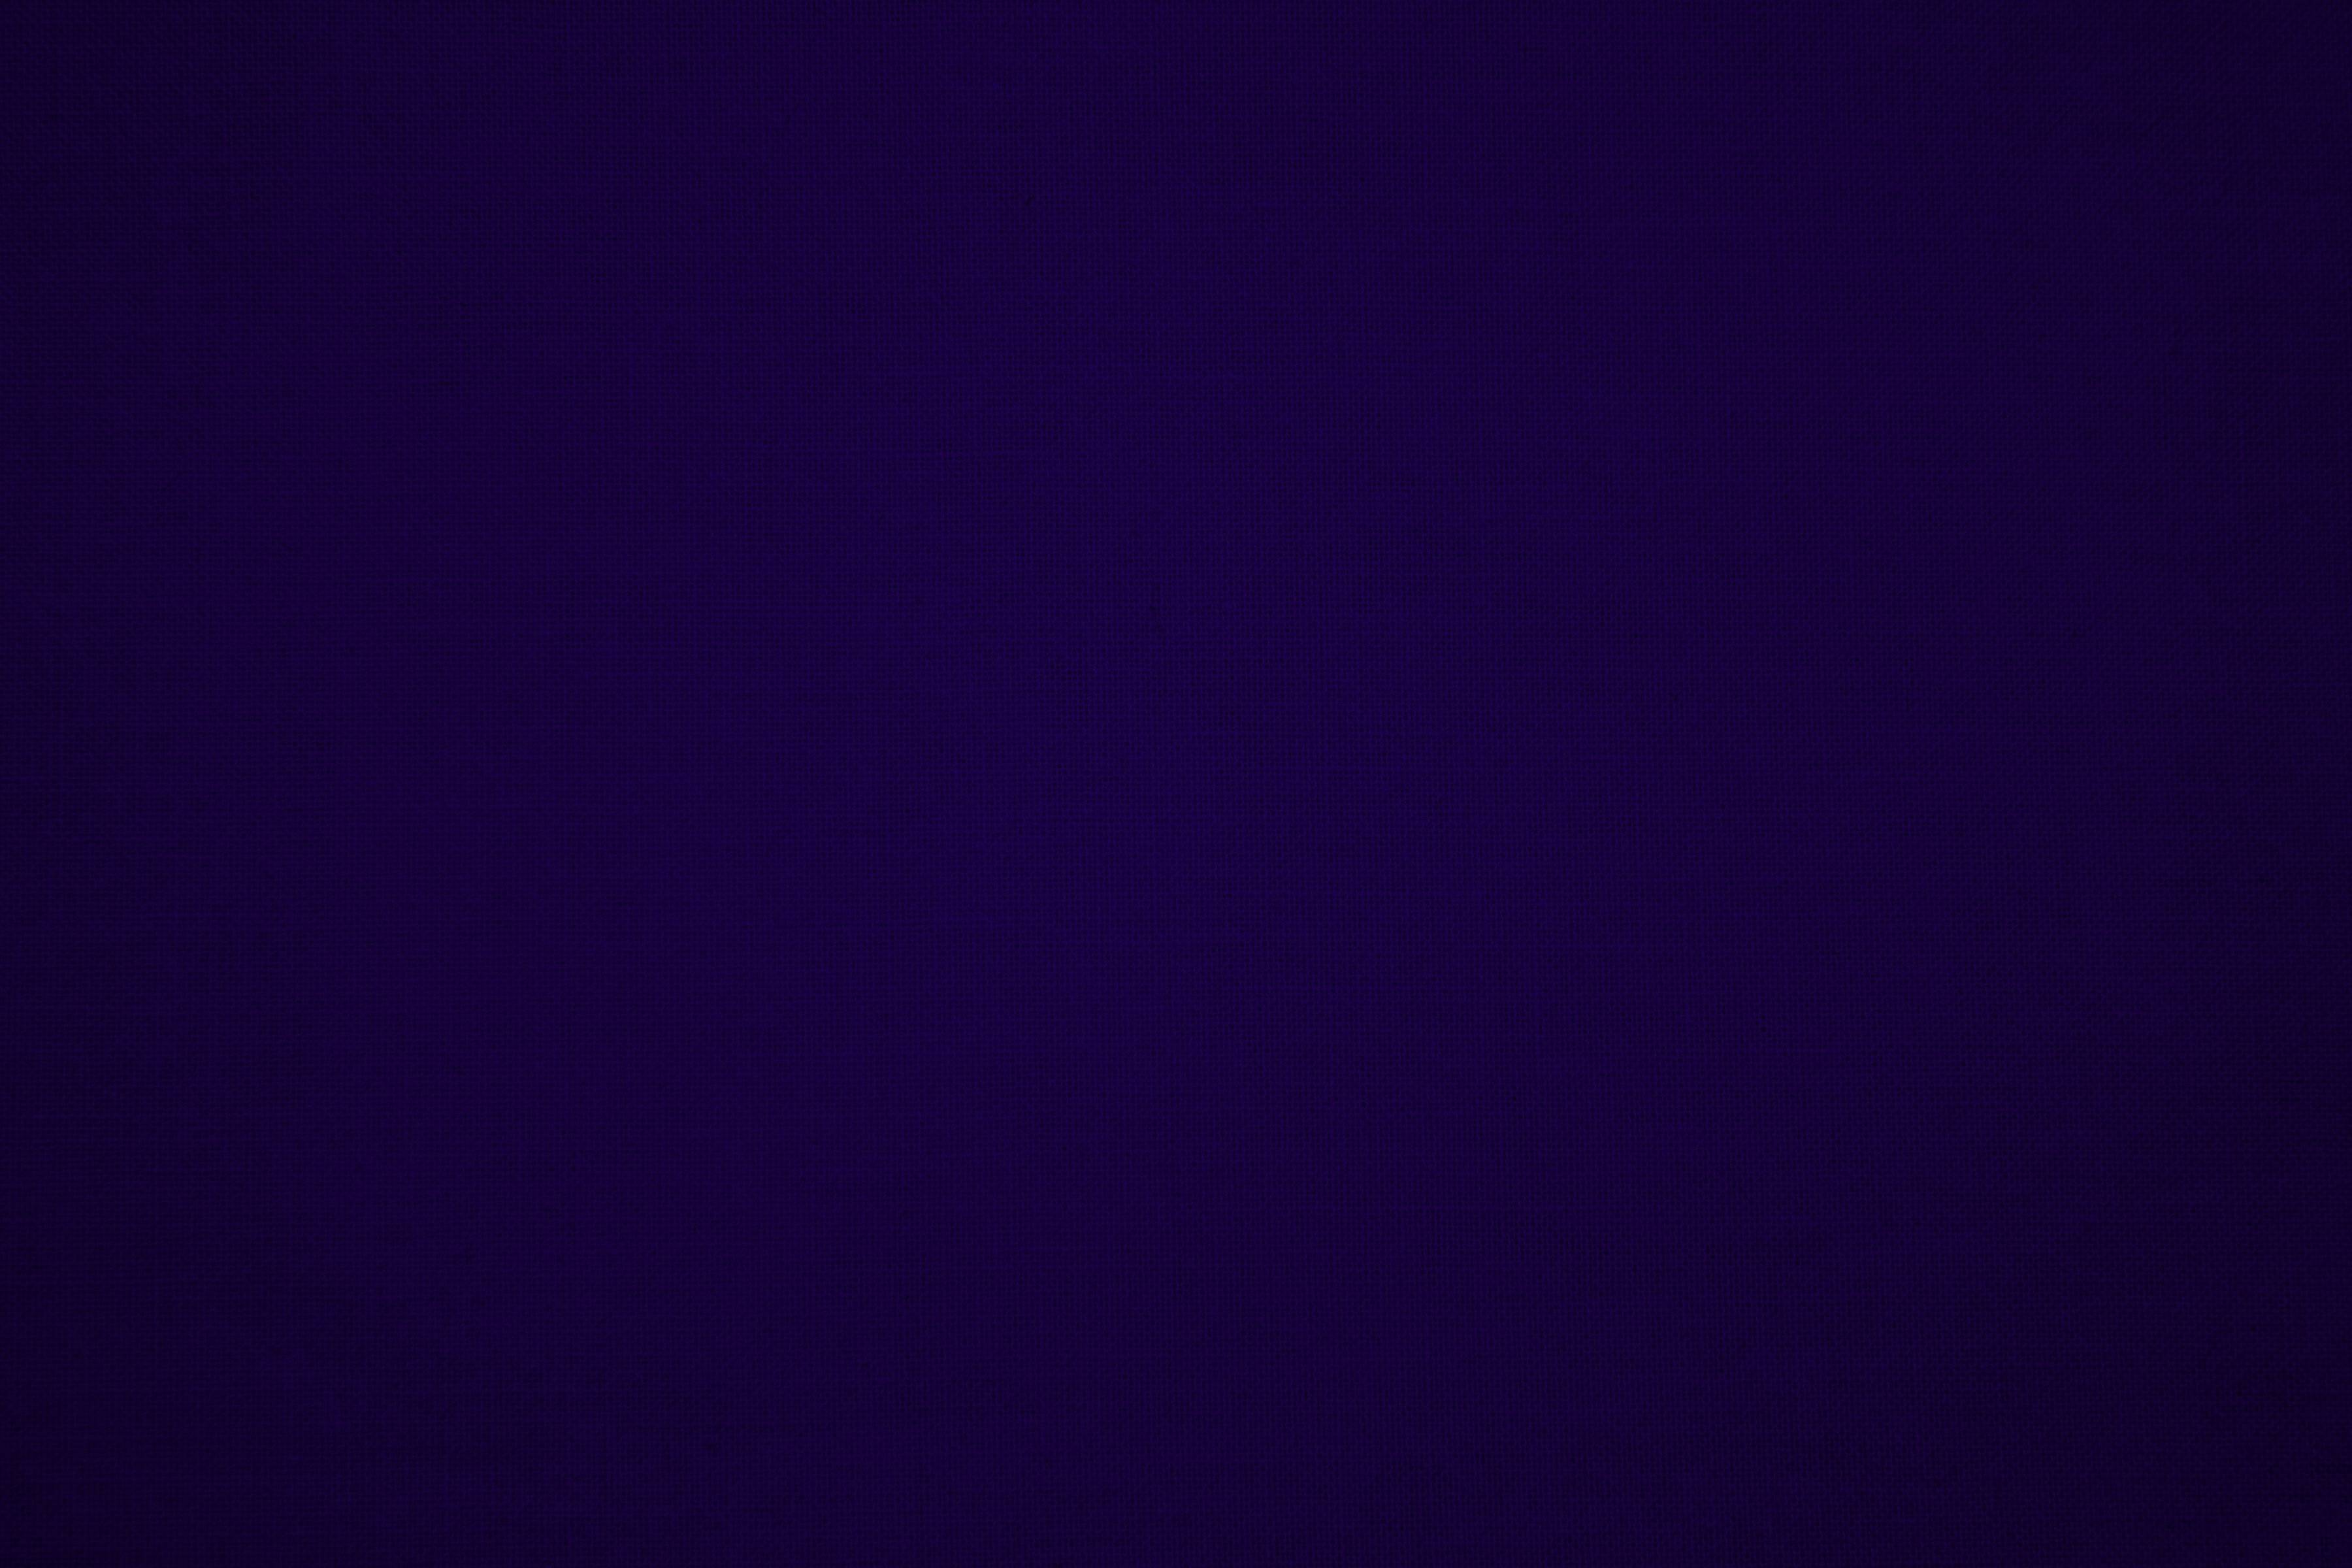 Wallpaper For > Shiny Royal Blue Background